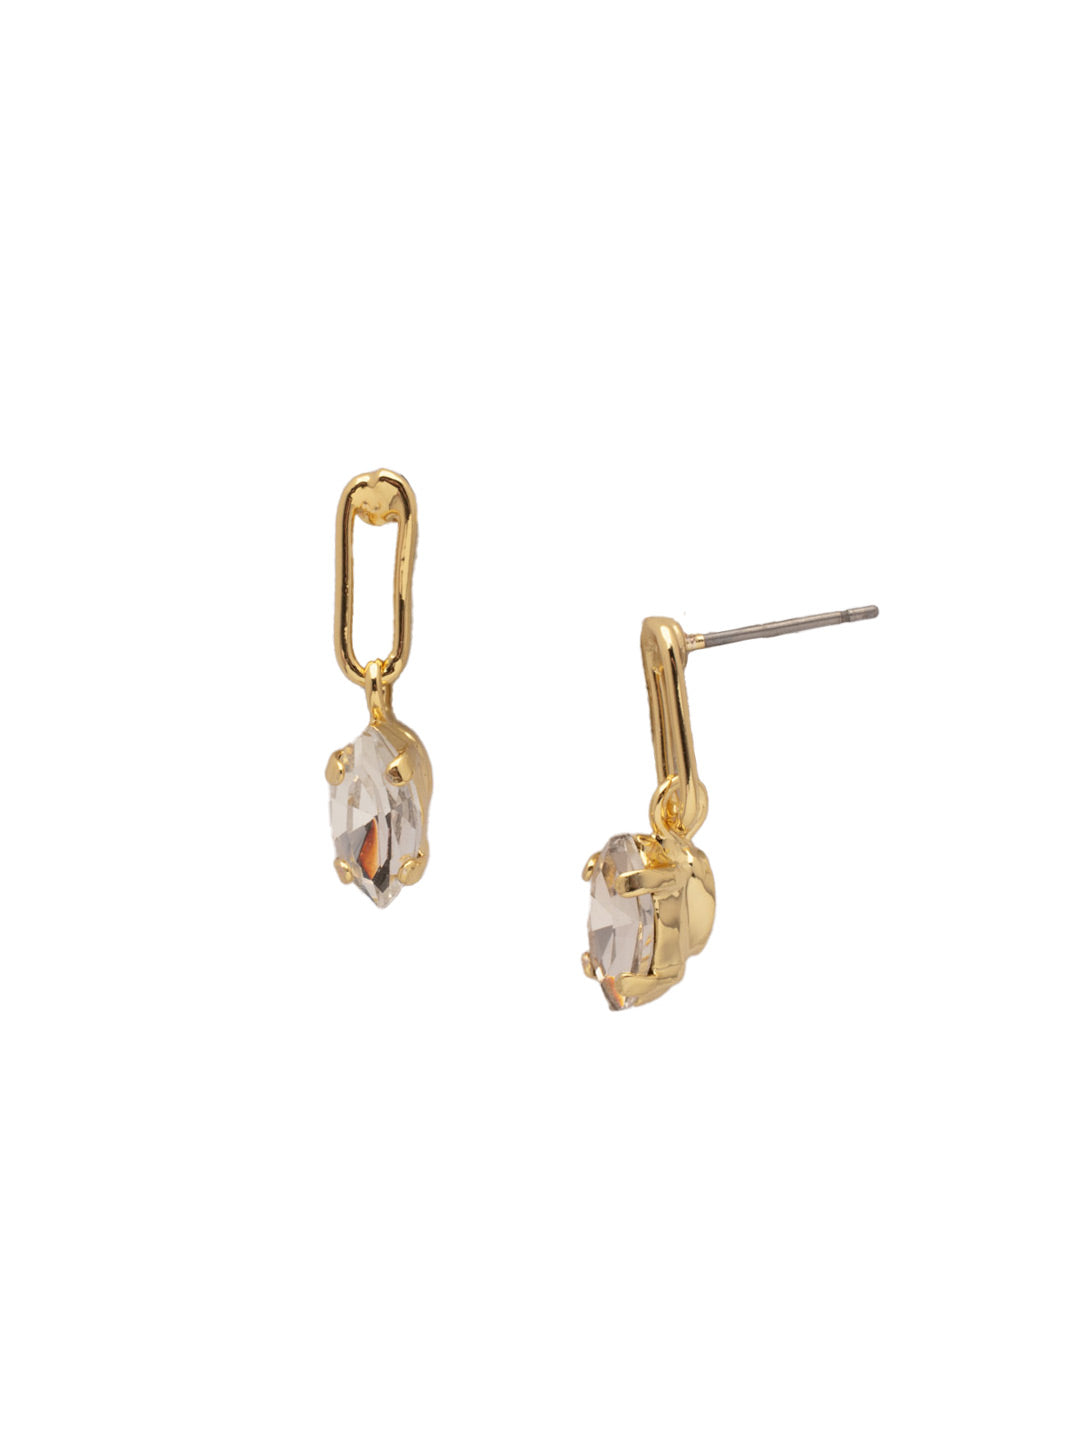 Clarissa Chain Link Dangle Earrings - EFL66BGCRY - <p>The Clarissa Chain Link Dangle Earrings feature a navette cut crystal dangling from a single chain link on a post. From Sorrelli's Crystal collection in our Bright Gold-tone finish.</p>